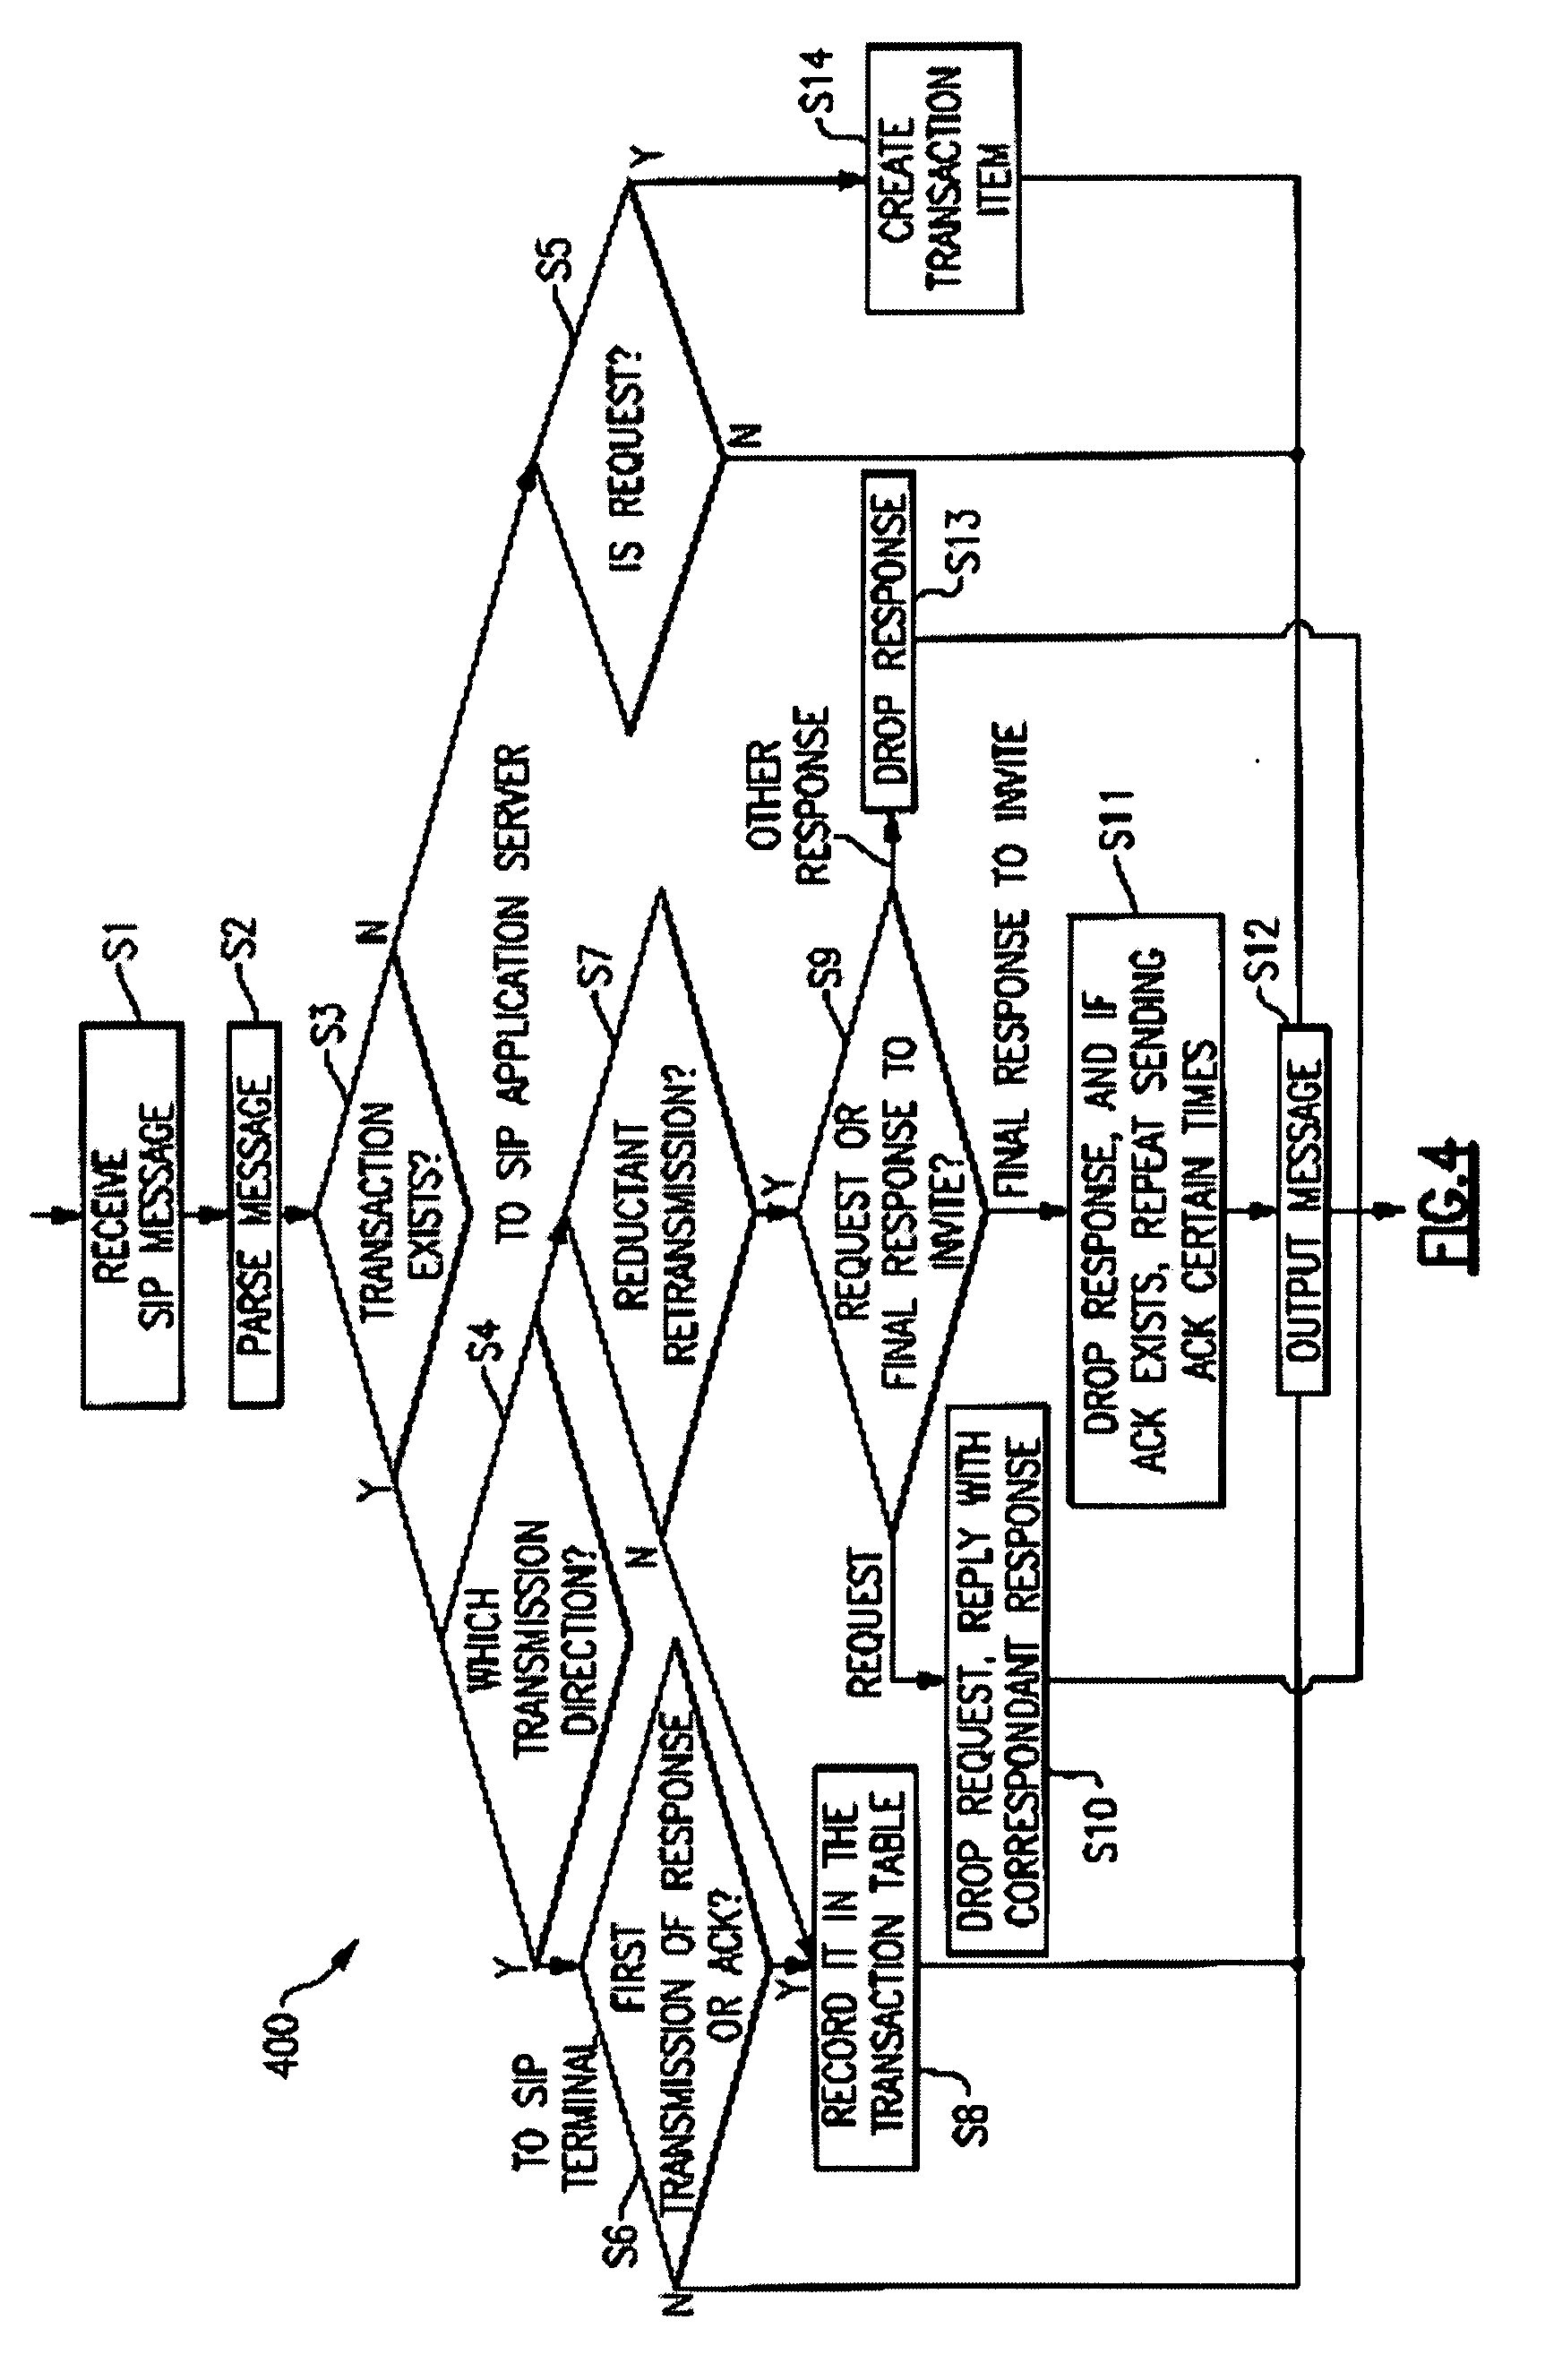 Method and Device for Rejecting Redundantly Retransmitted SIP Messages